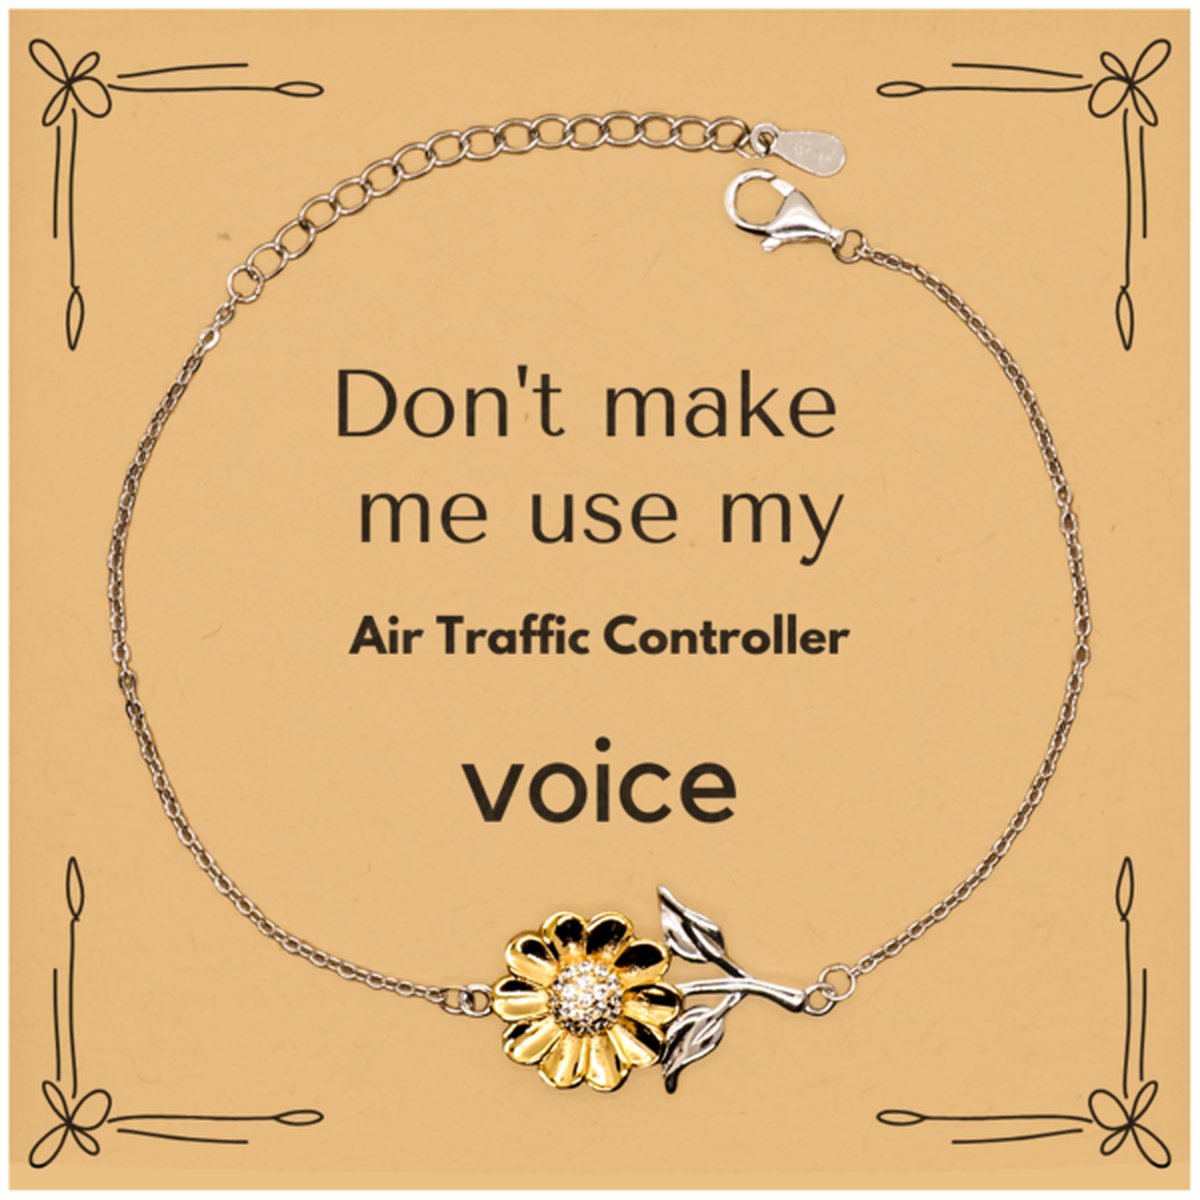 Don't make me use my Air Traffic Controller voice, Sarcasm Air Traffic Controller Card Gifts, Christmas Air Traffic Controller Sunflower Bracelet Birthday Unique Gifts For Air Traffic Controller Coworkers, Men, Women, Colleague, Friends